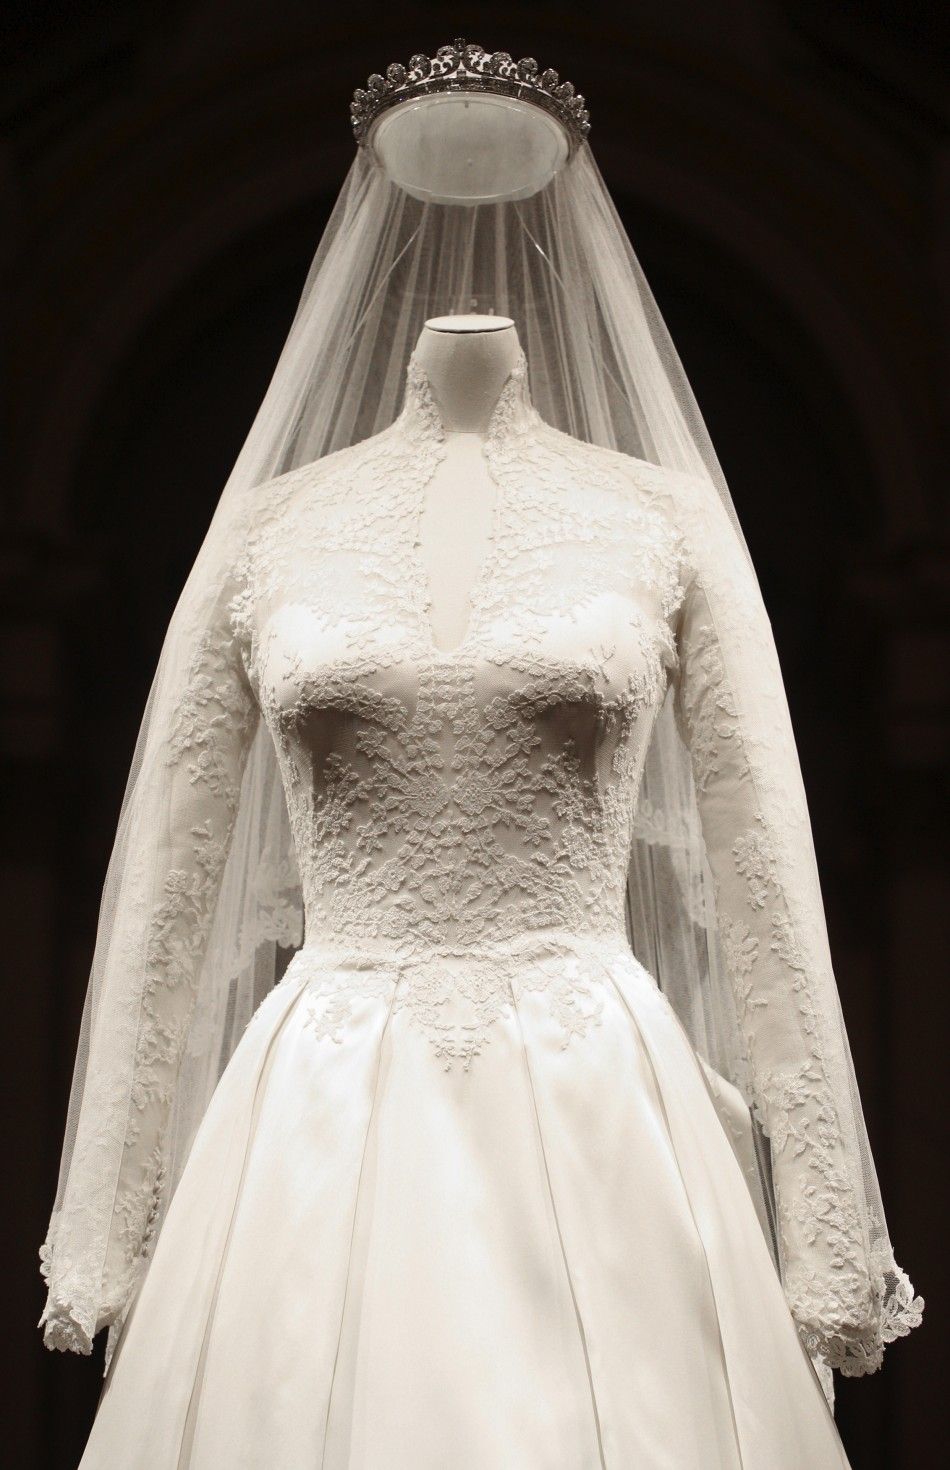  The wedding dress of Britains Catherine, Duchess of Cambridge is seen as it is prepared for display at Buckingham Palace in London